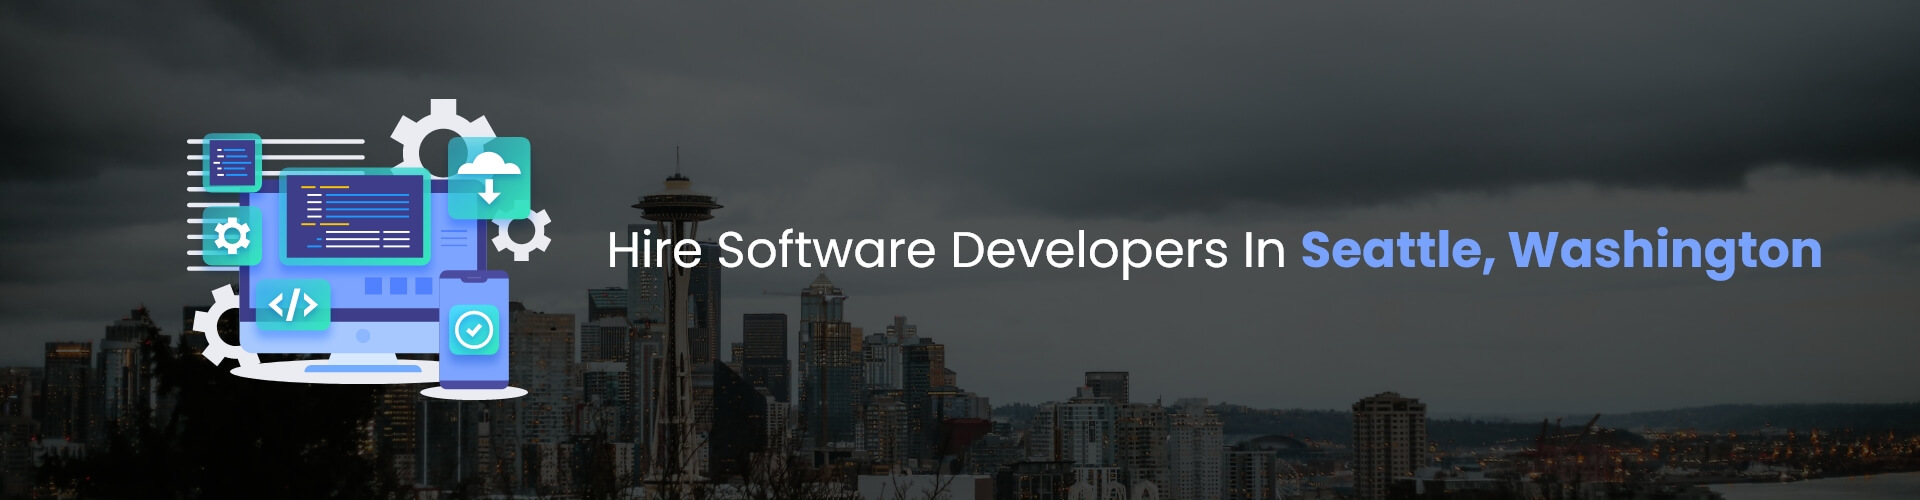 hire software developers in seattle, washington